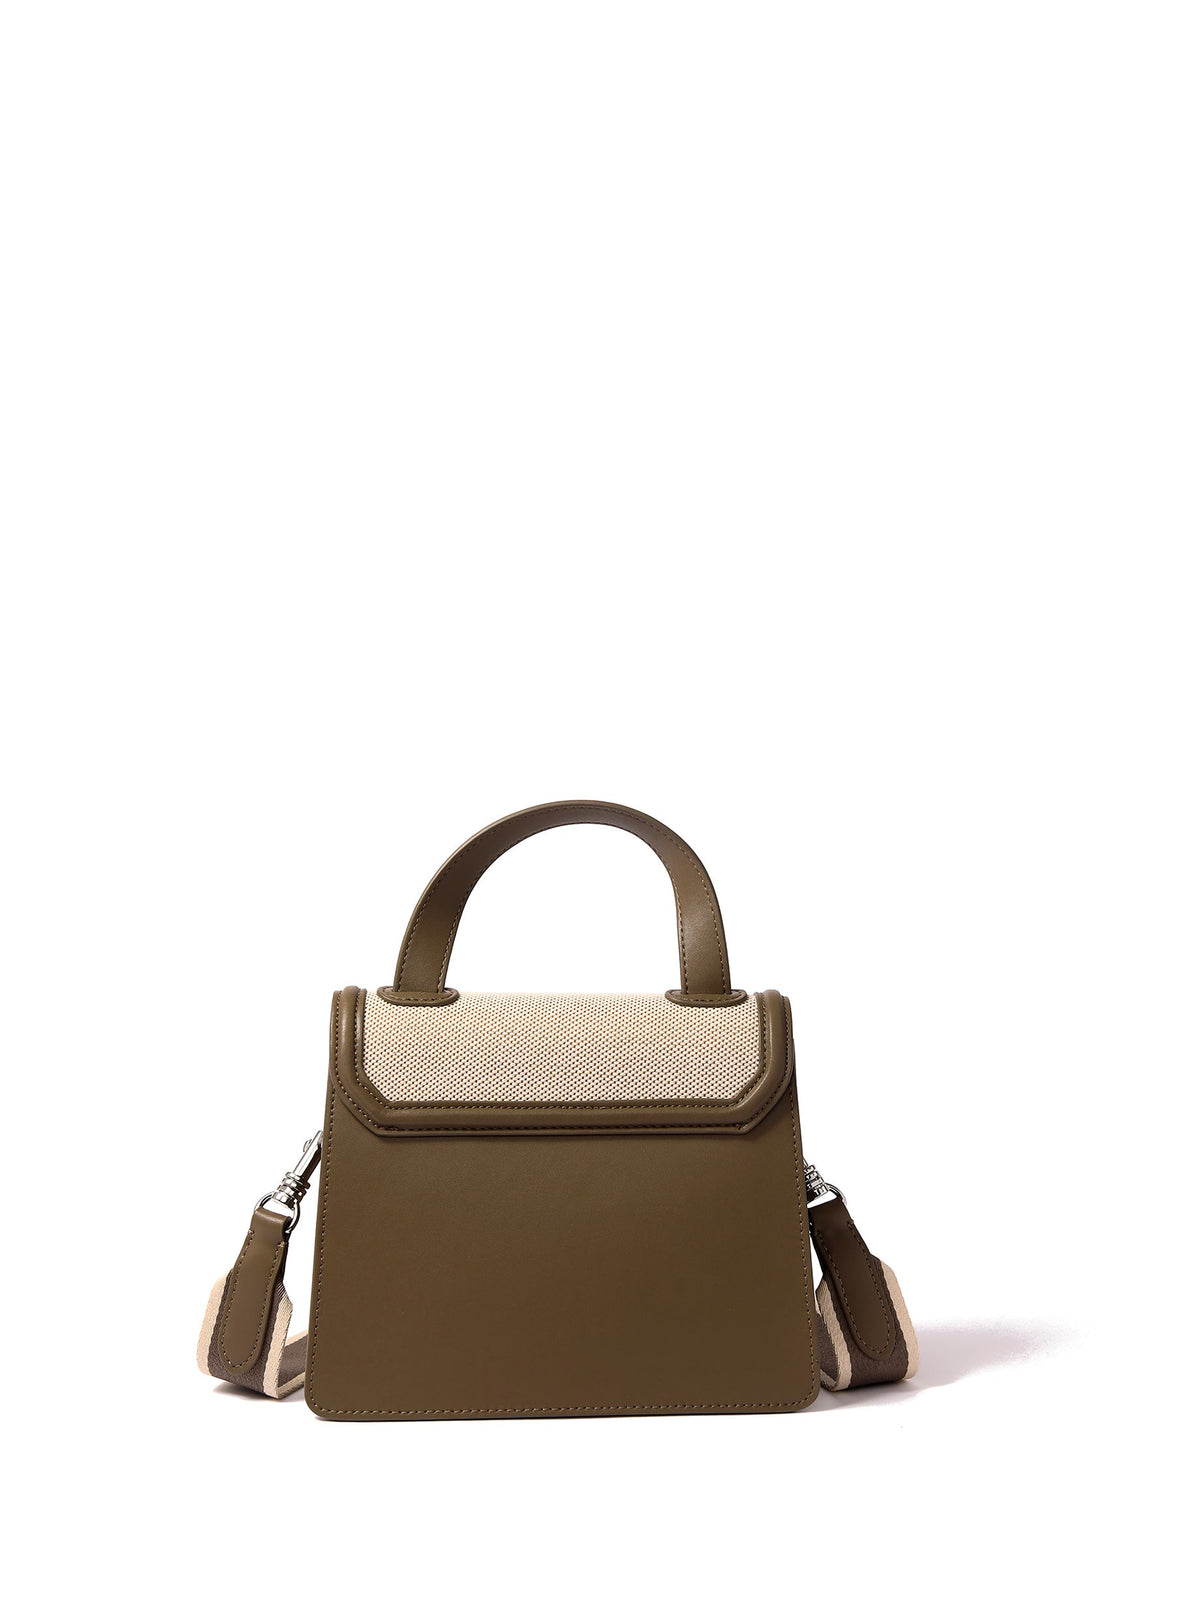 Evelyn Bag in Canvas and Genuine Leather, Gray by Bob Oré